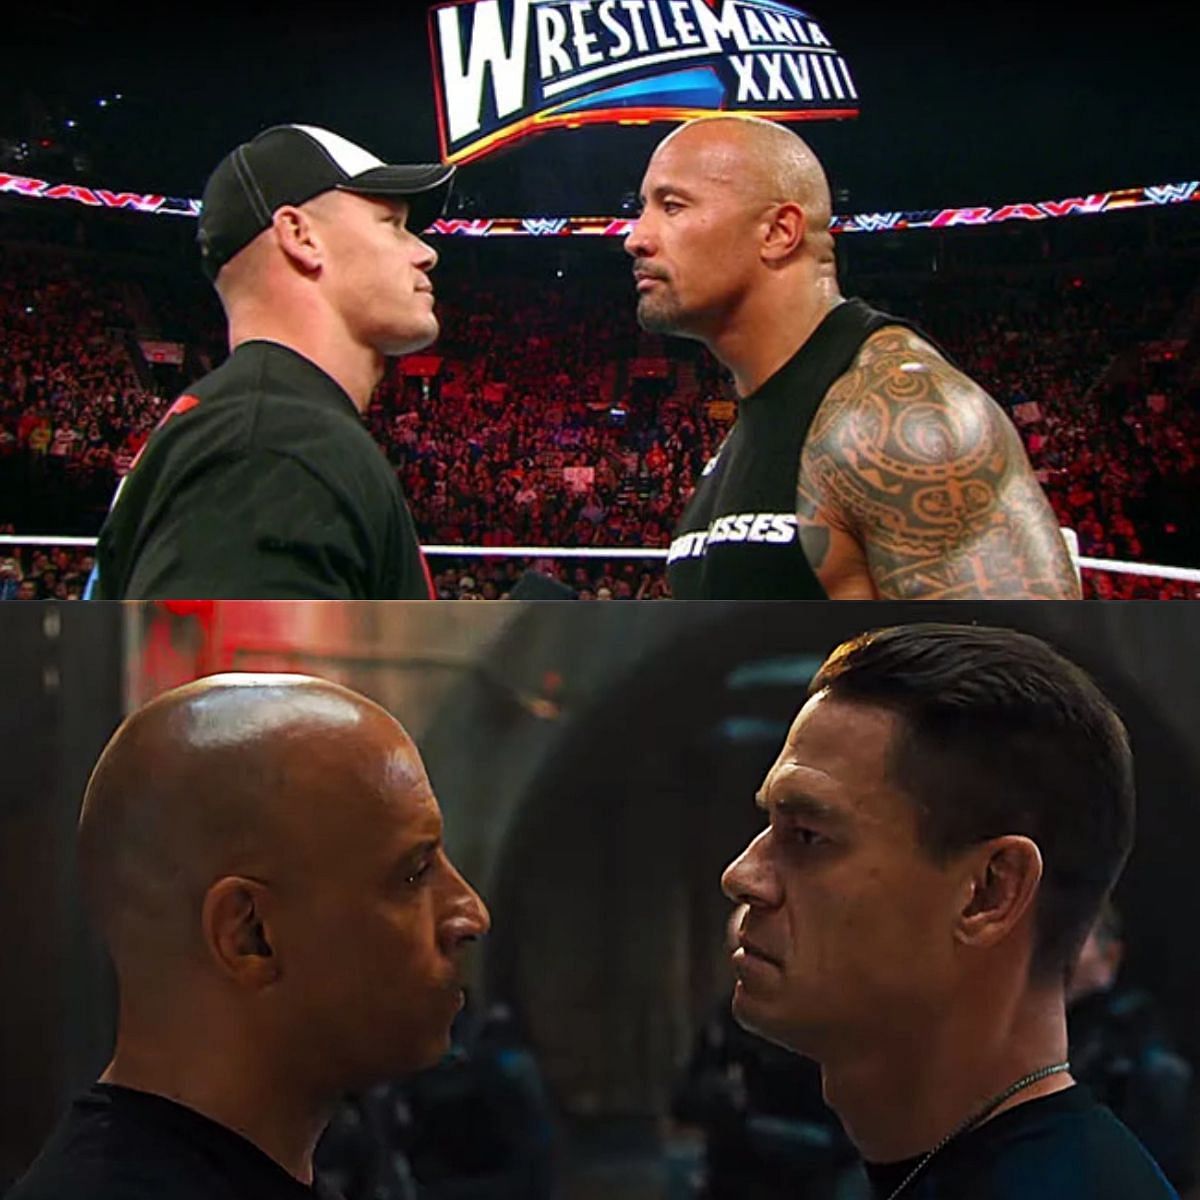 John Cena had a similar dynamic with The Rock to Jakob Toretto &amp; his brother Dominic.